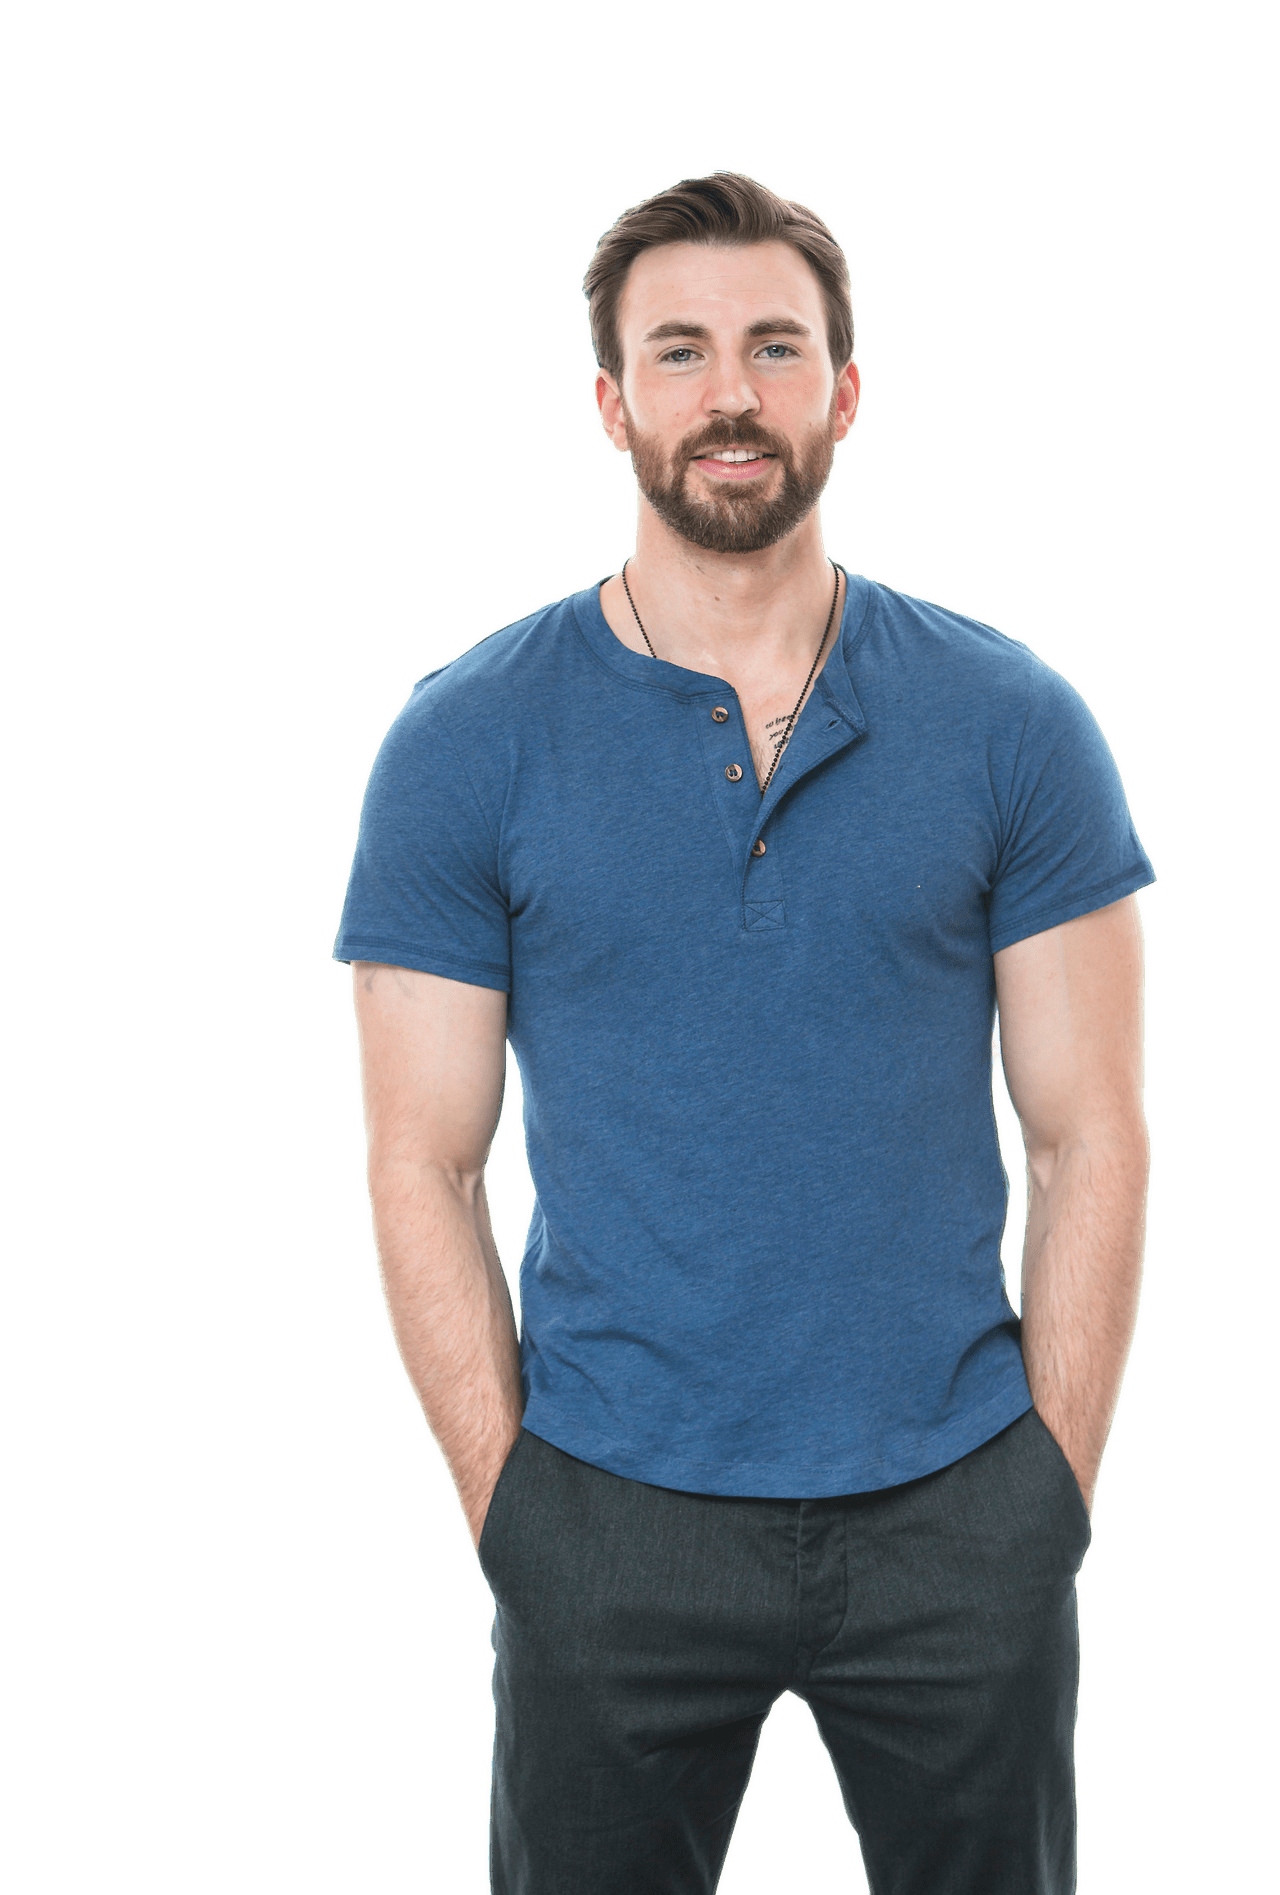 Chris Evans PNG by WakingTheF